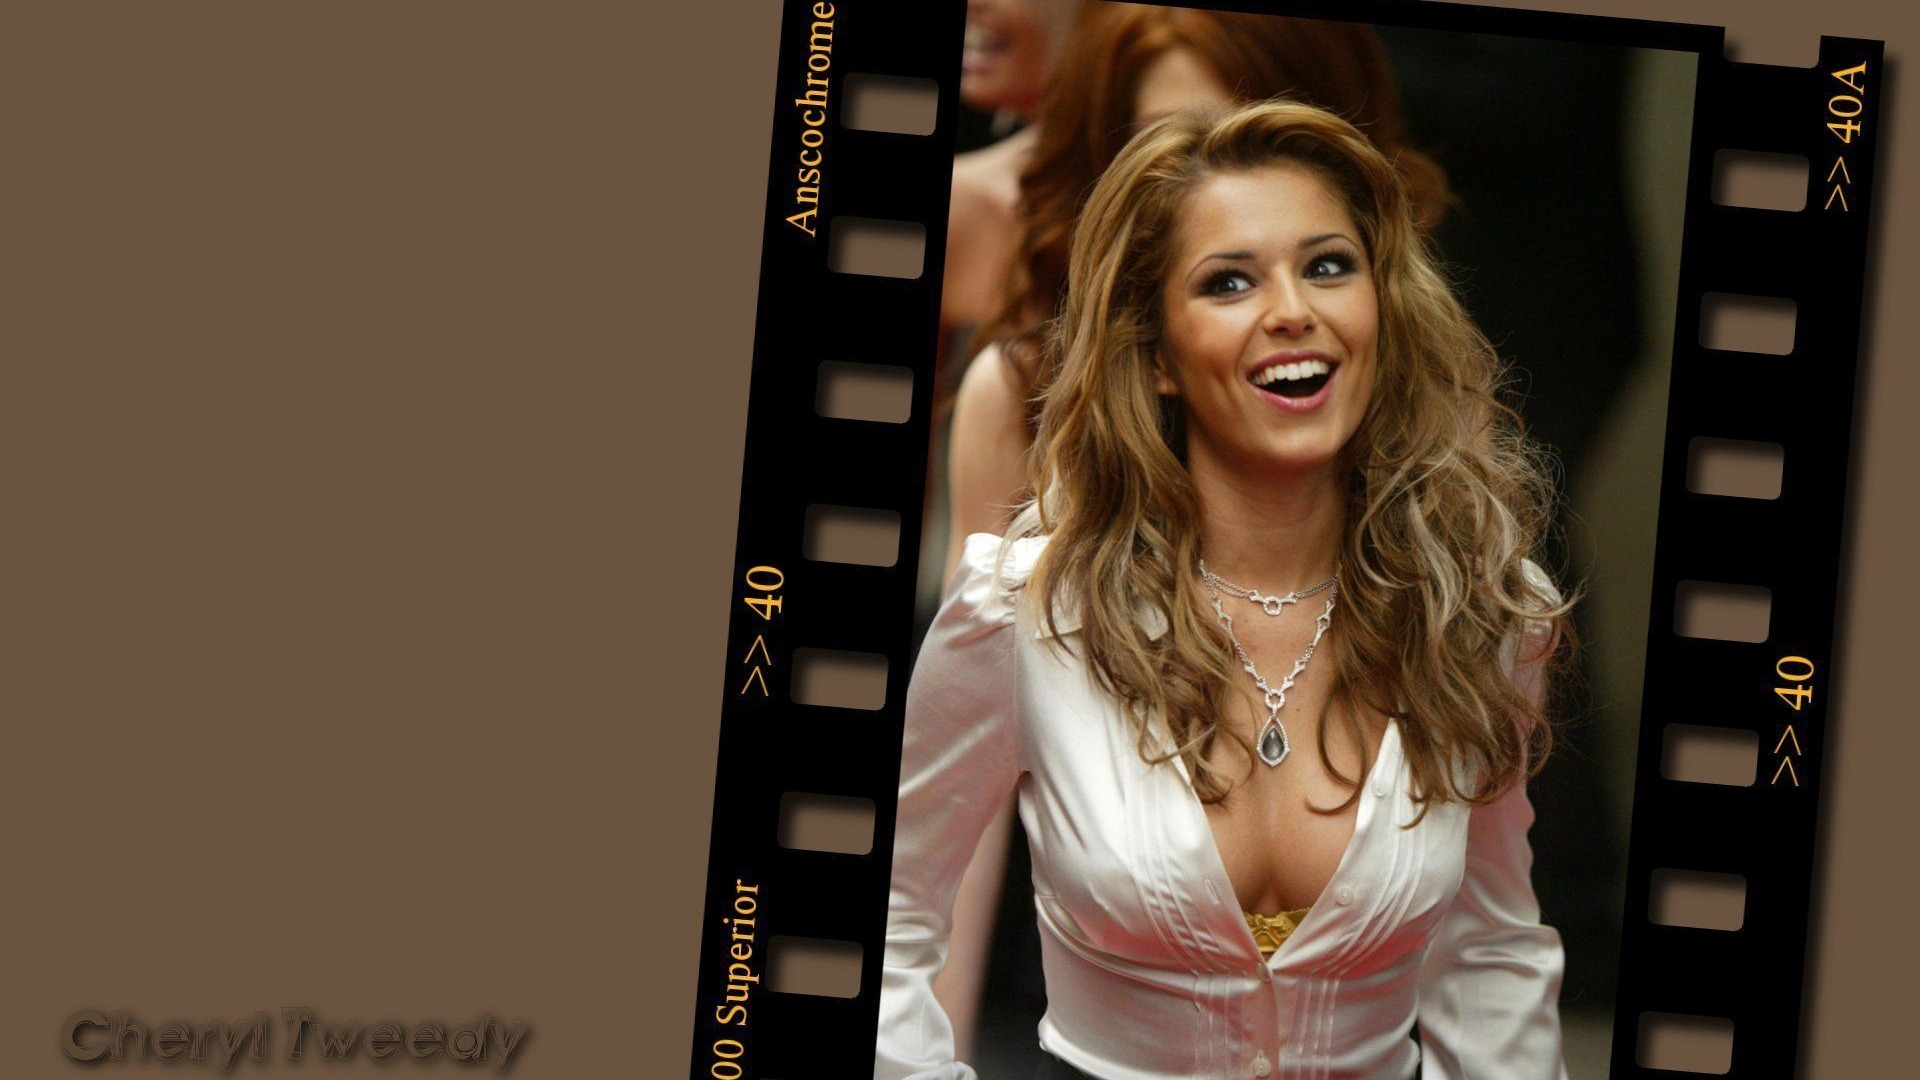 Cheryl Tweedy #002 - 1920x1080 Wallpapers Pictures Photos Images